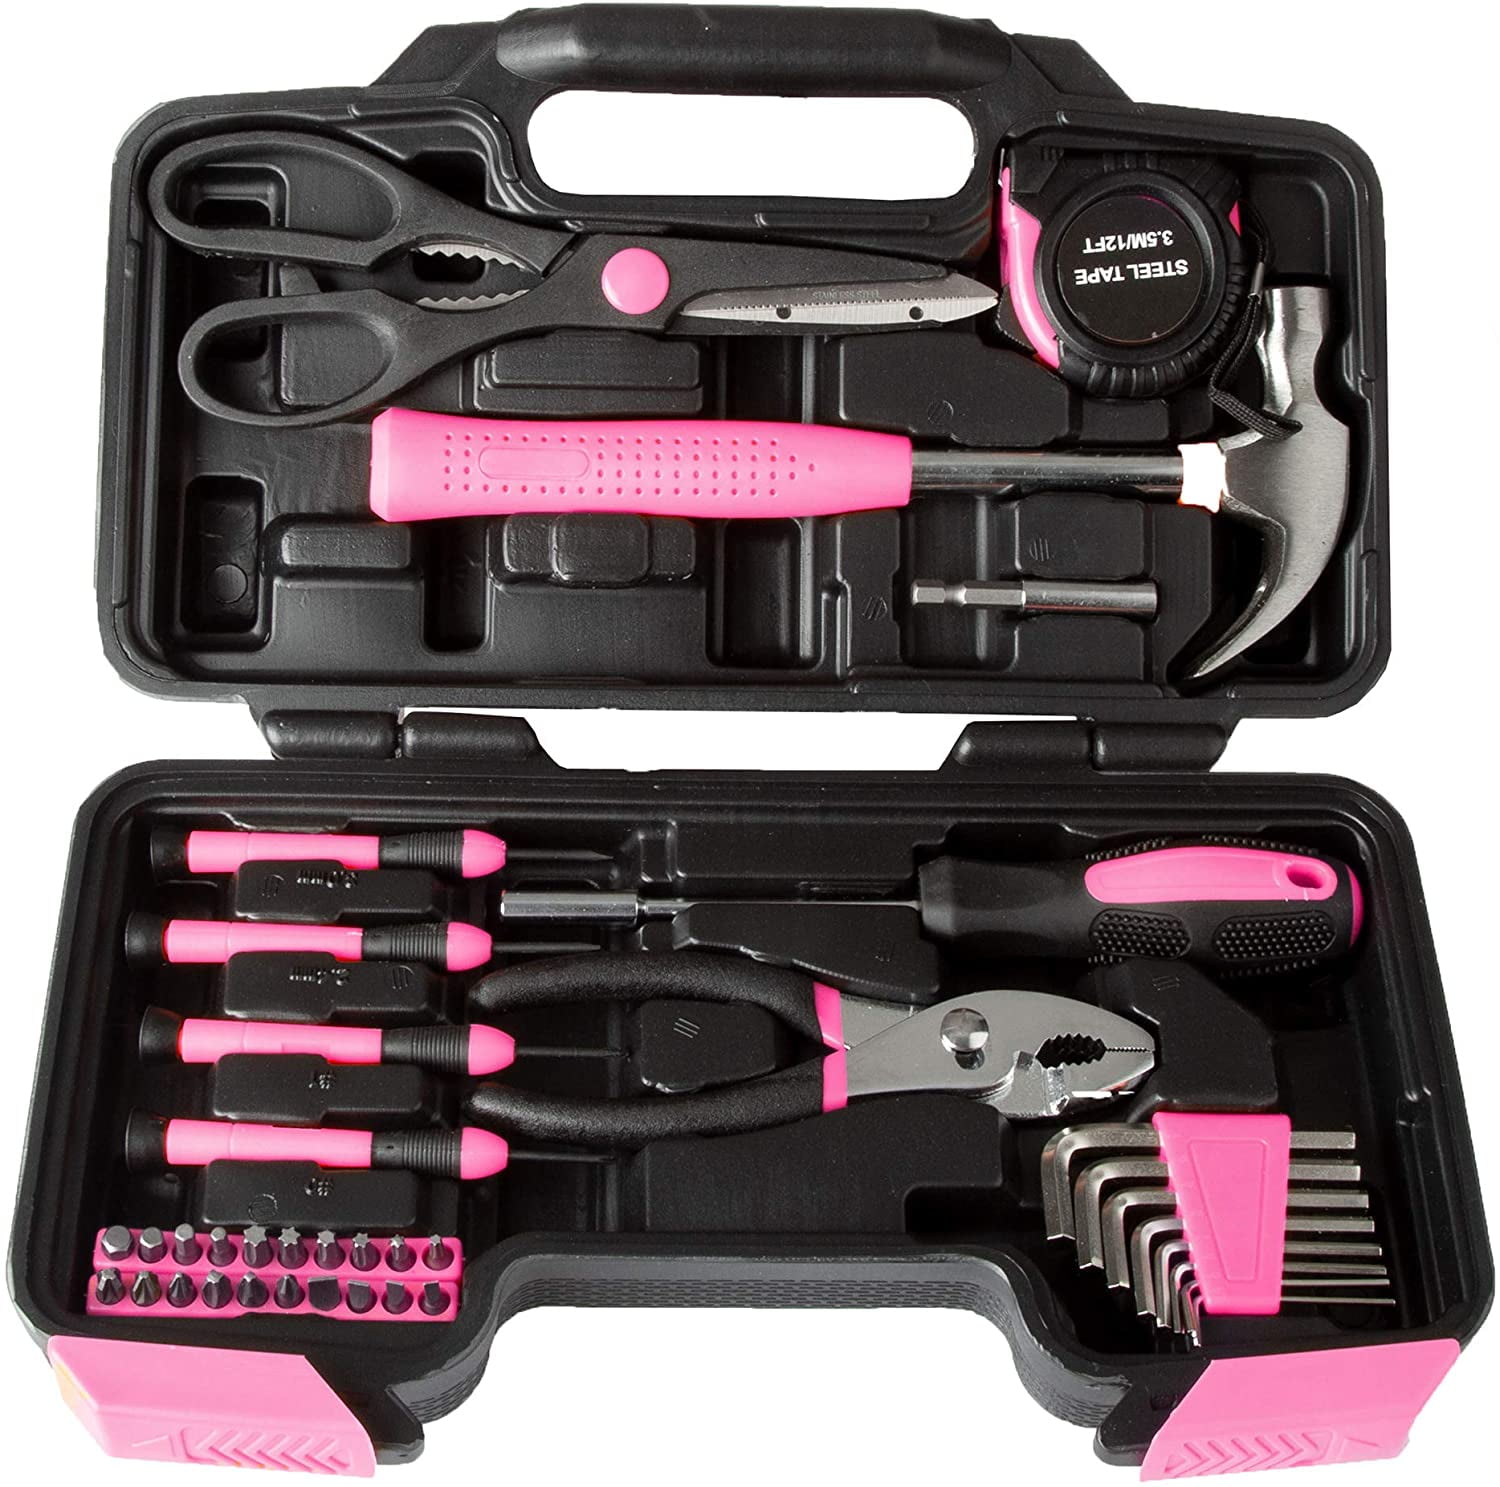 39 Piece Tool Box Kit, Pink - Small Basic Home Tool Set - Great for College  Students, Household Use & More